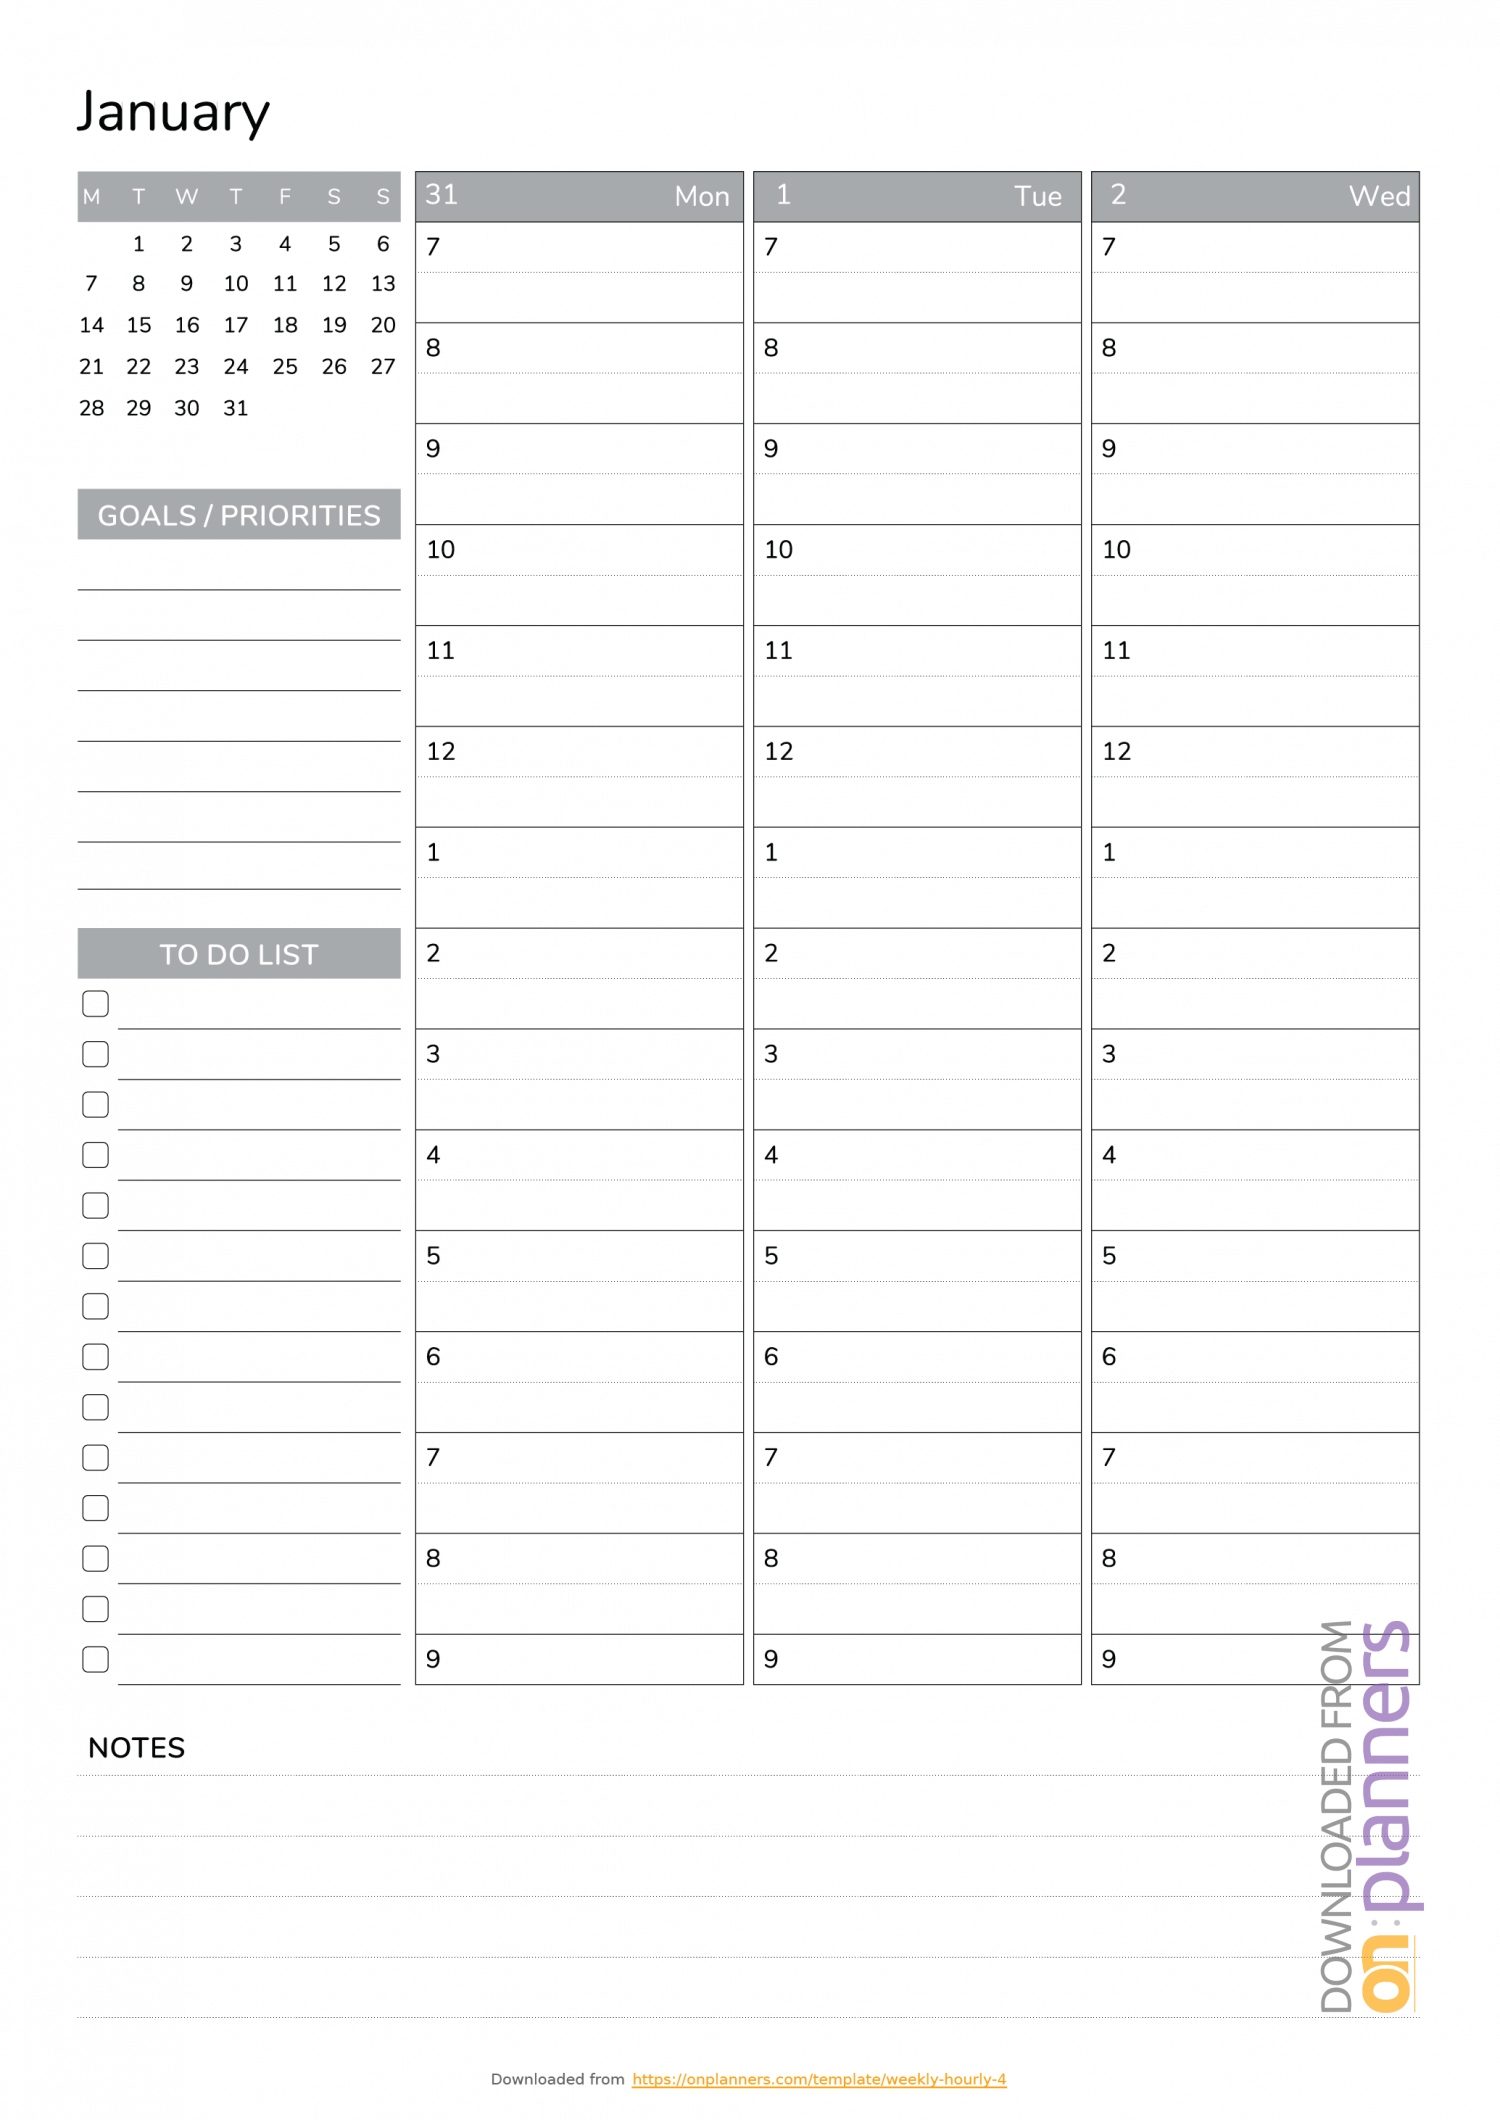 The Best Weekly Schedule Templates. Organize Your Time 8 Week Calendar Template